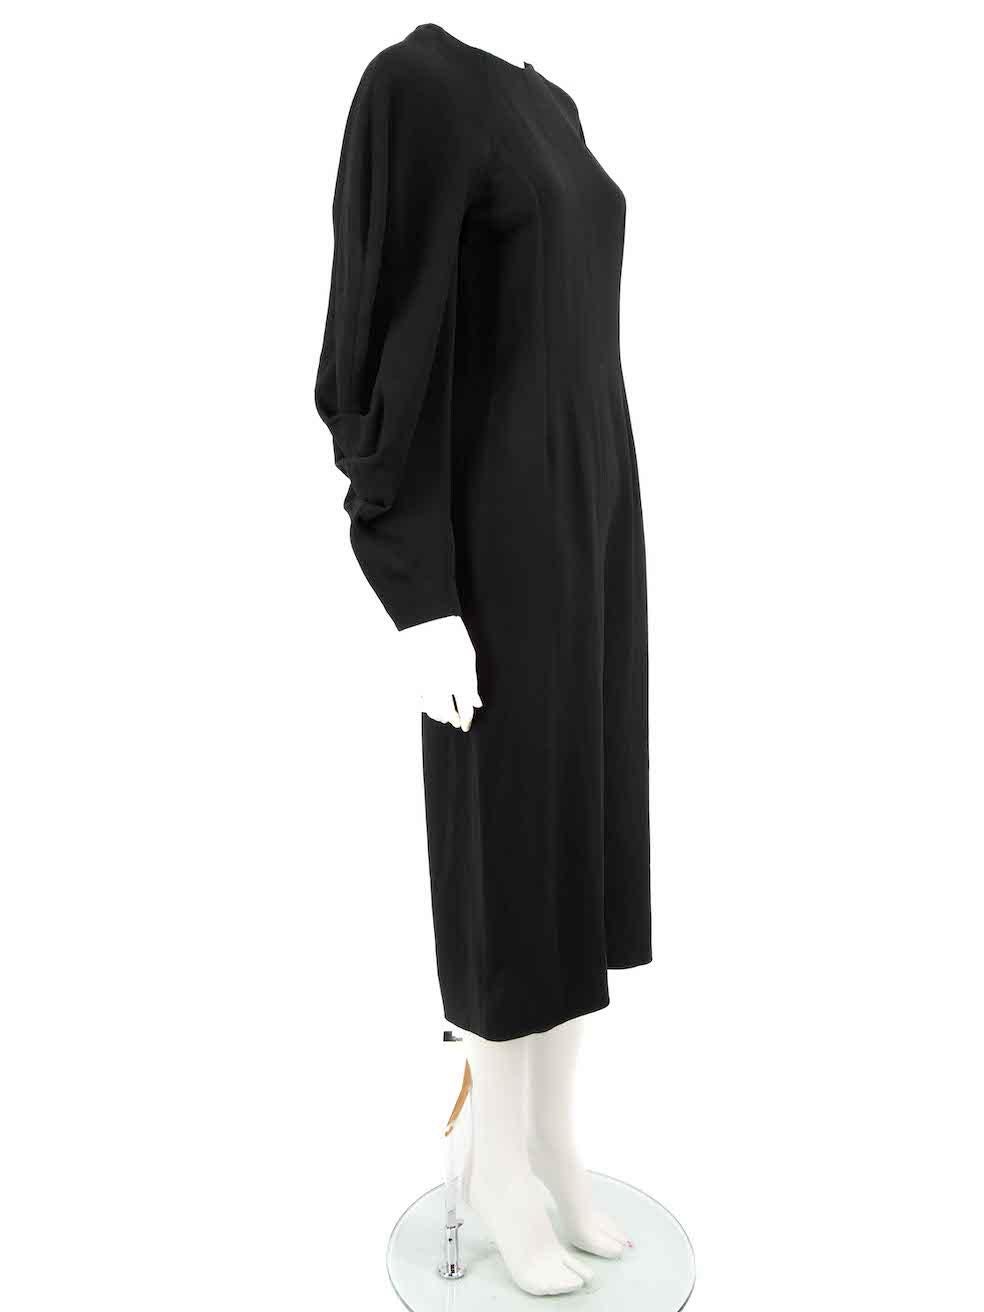 CONDITION is Very good. Minimal wear to dress is evident. Minimal pull to thread to rear hemline near zipper on this used Victoria Beckham designer resale item.
 
 
 
 Details
 
 
 Black
 
 Viscose
 
 Dress
 
 Midi
 
 Back open ended zip fastening
